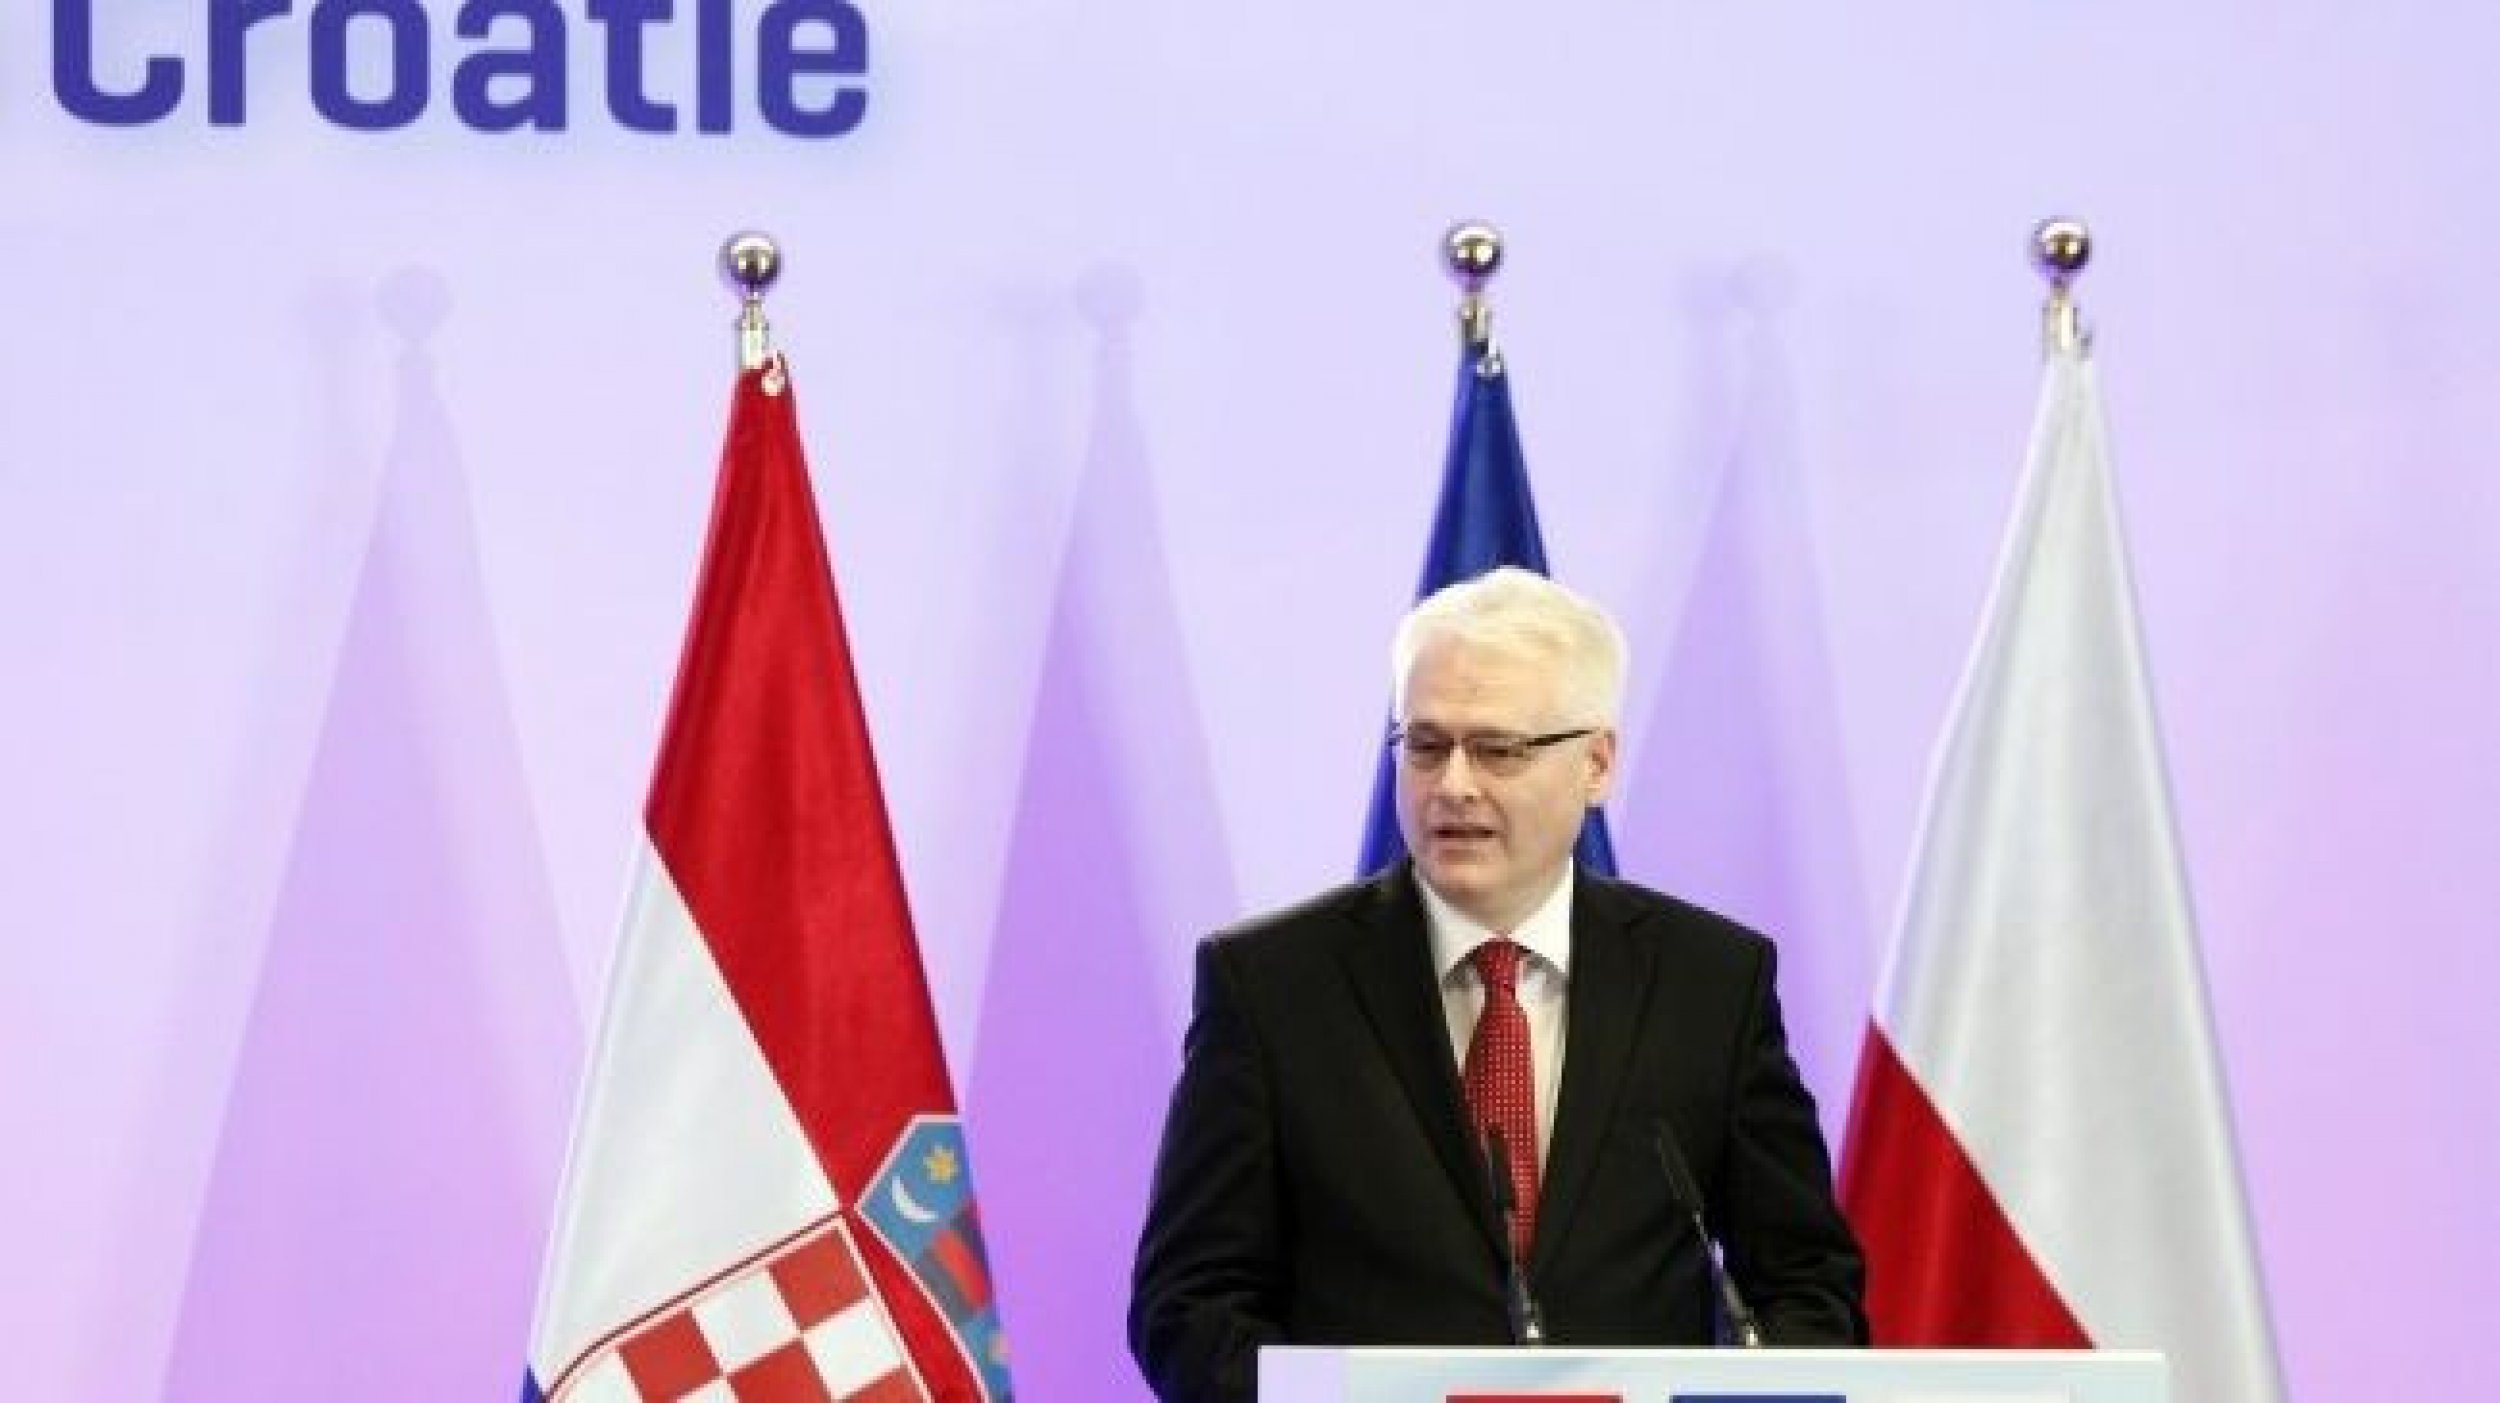 Croatia Signs Treaty to Join EU in 2013 After 6 yrs of Talks